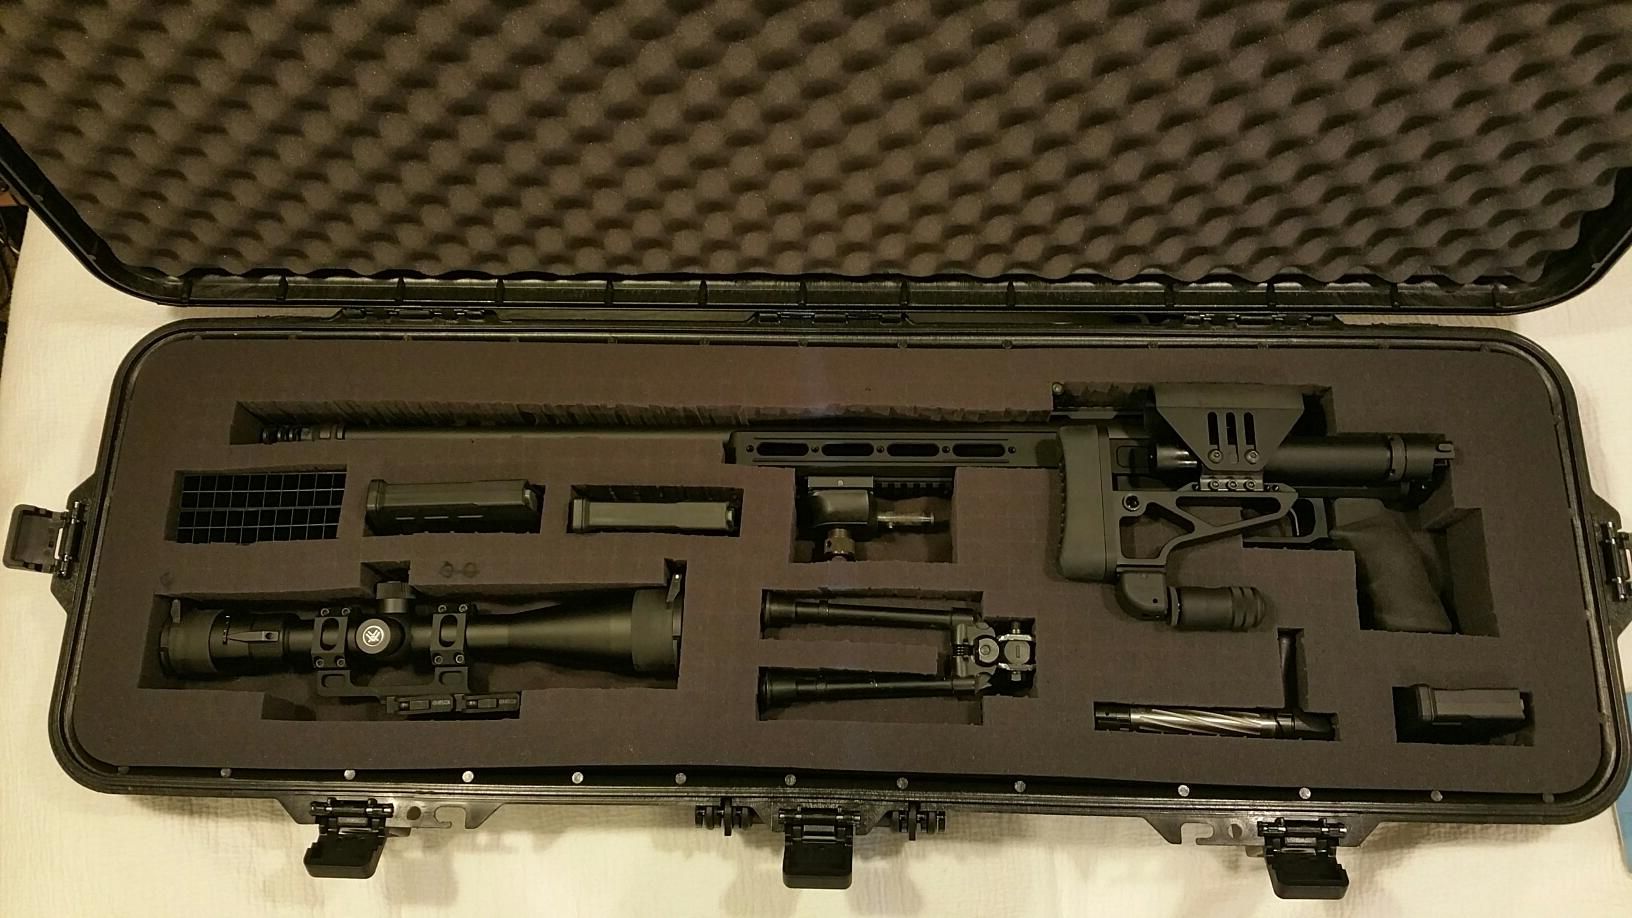 I have always wanted to assemble a sniper rifle from a neatly packed foam case.